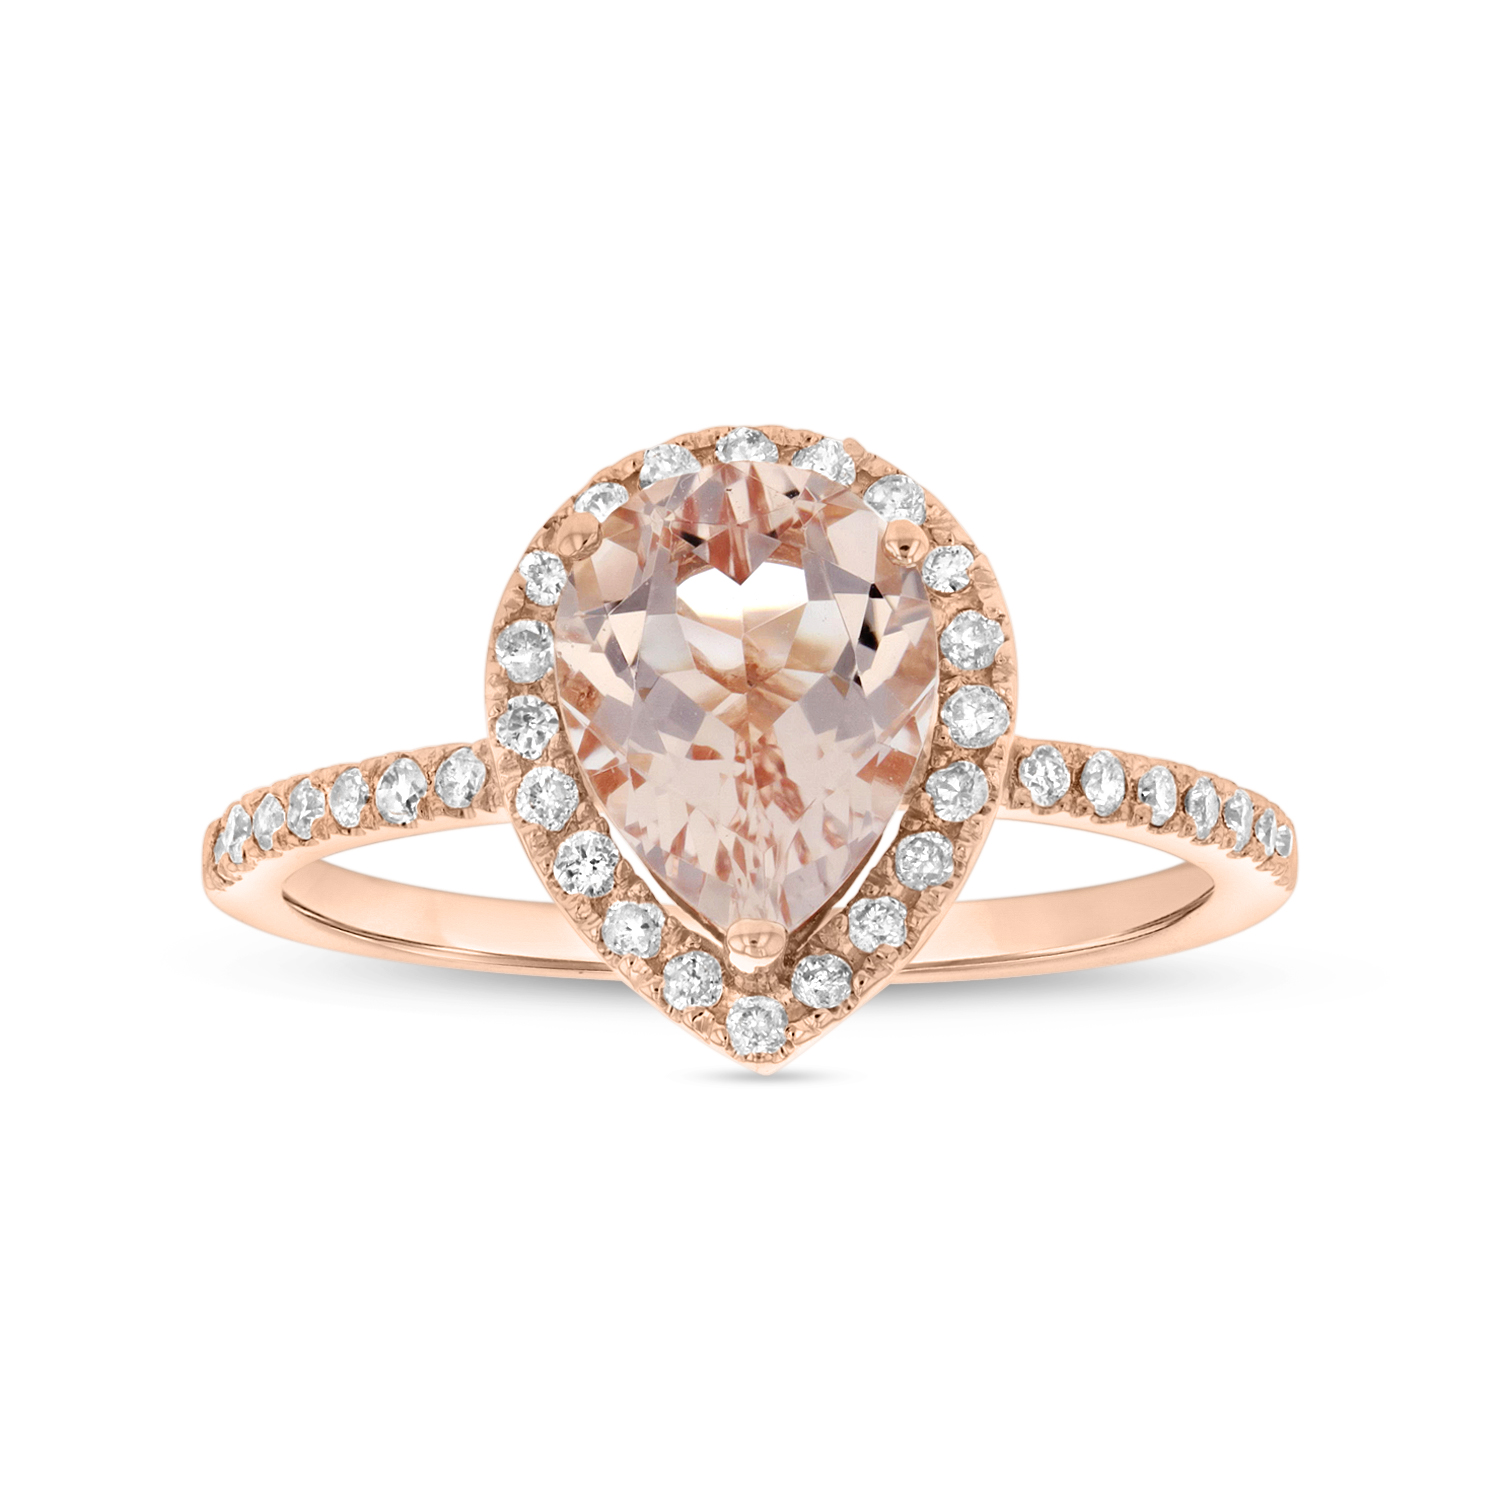 View 9X7 mm Pear Shape Morganite and Diamond Ring in 14k Rose Gold